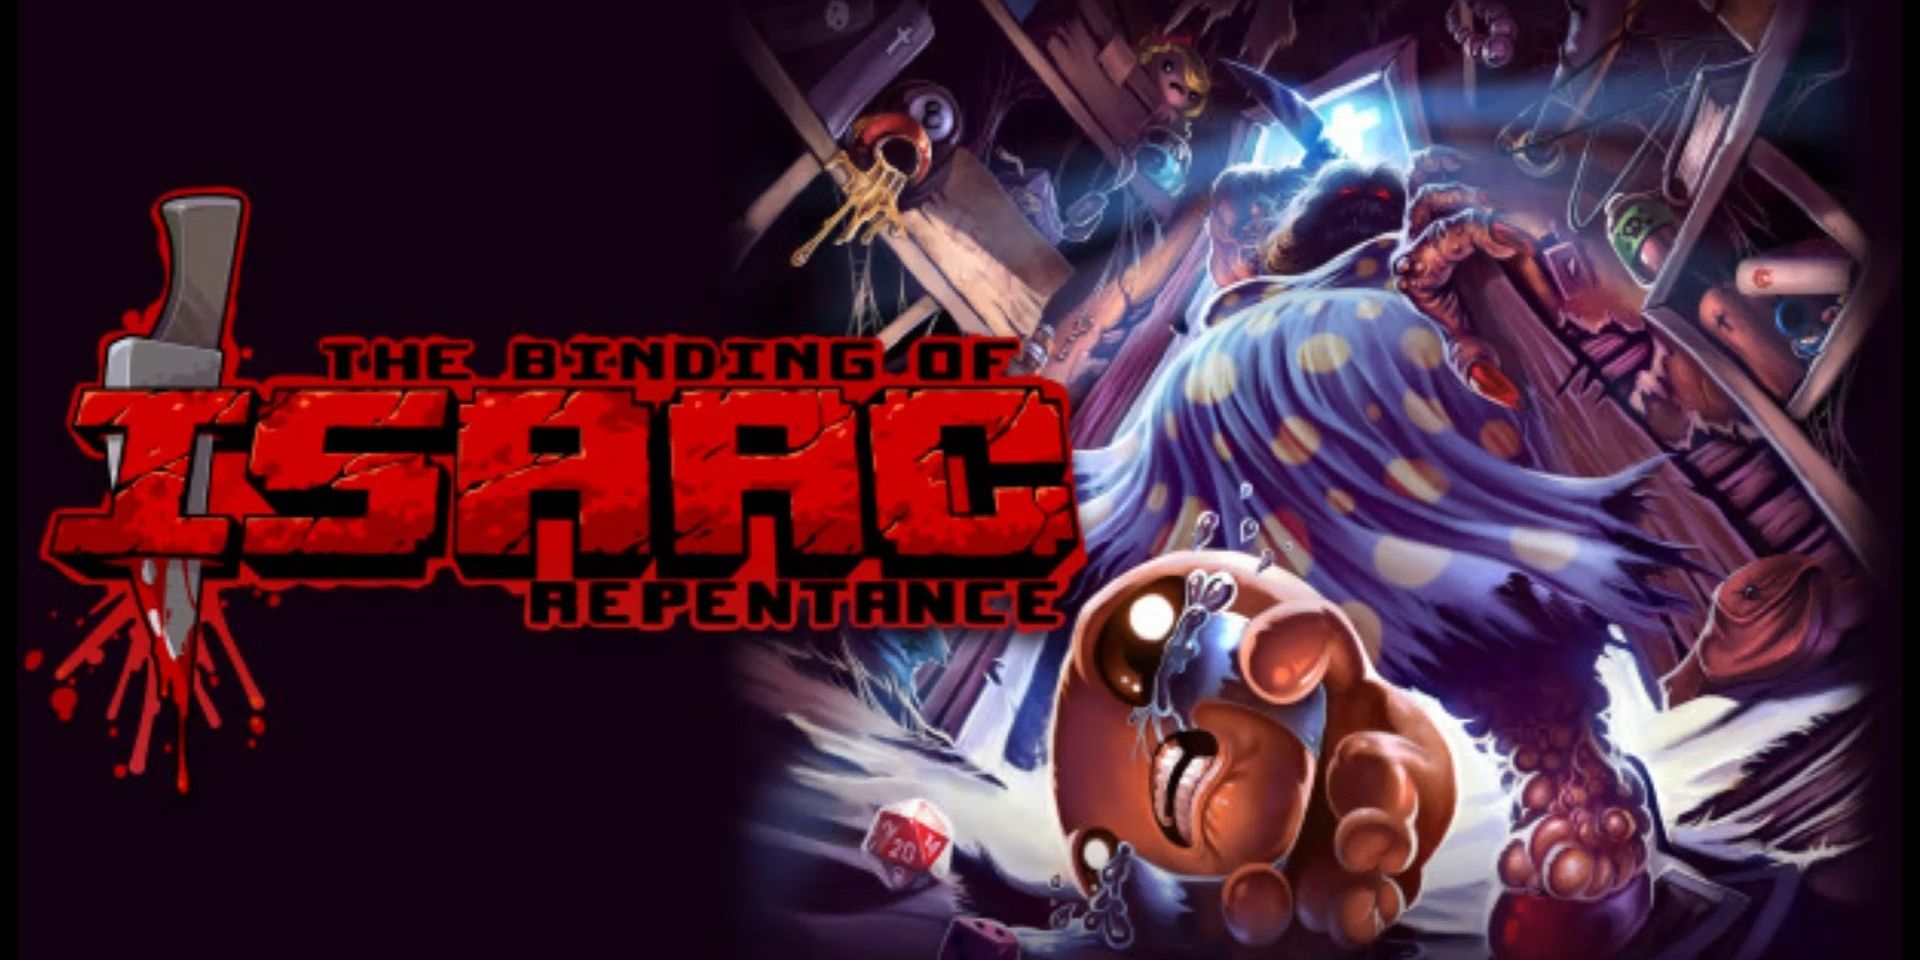 The Binding of Isaac: Afterbirth+ (preowned)